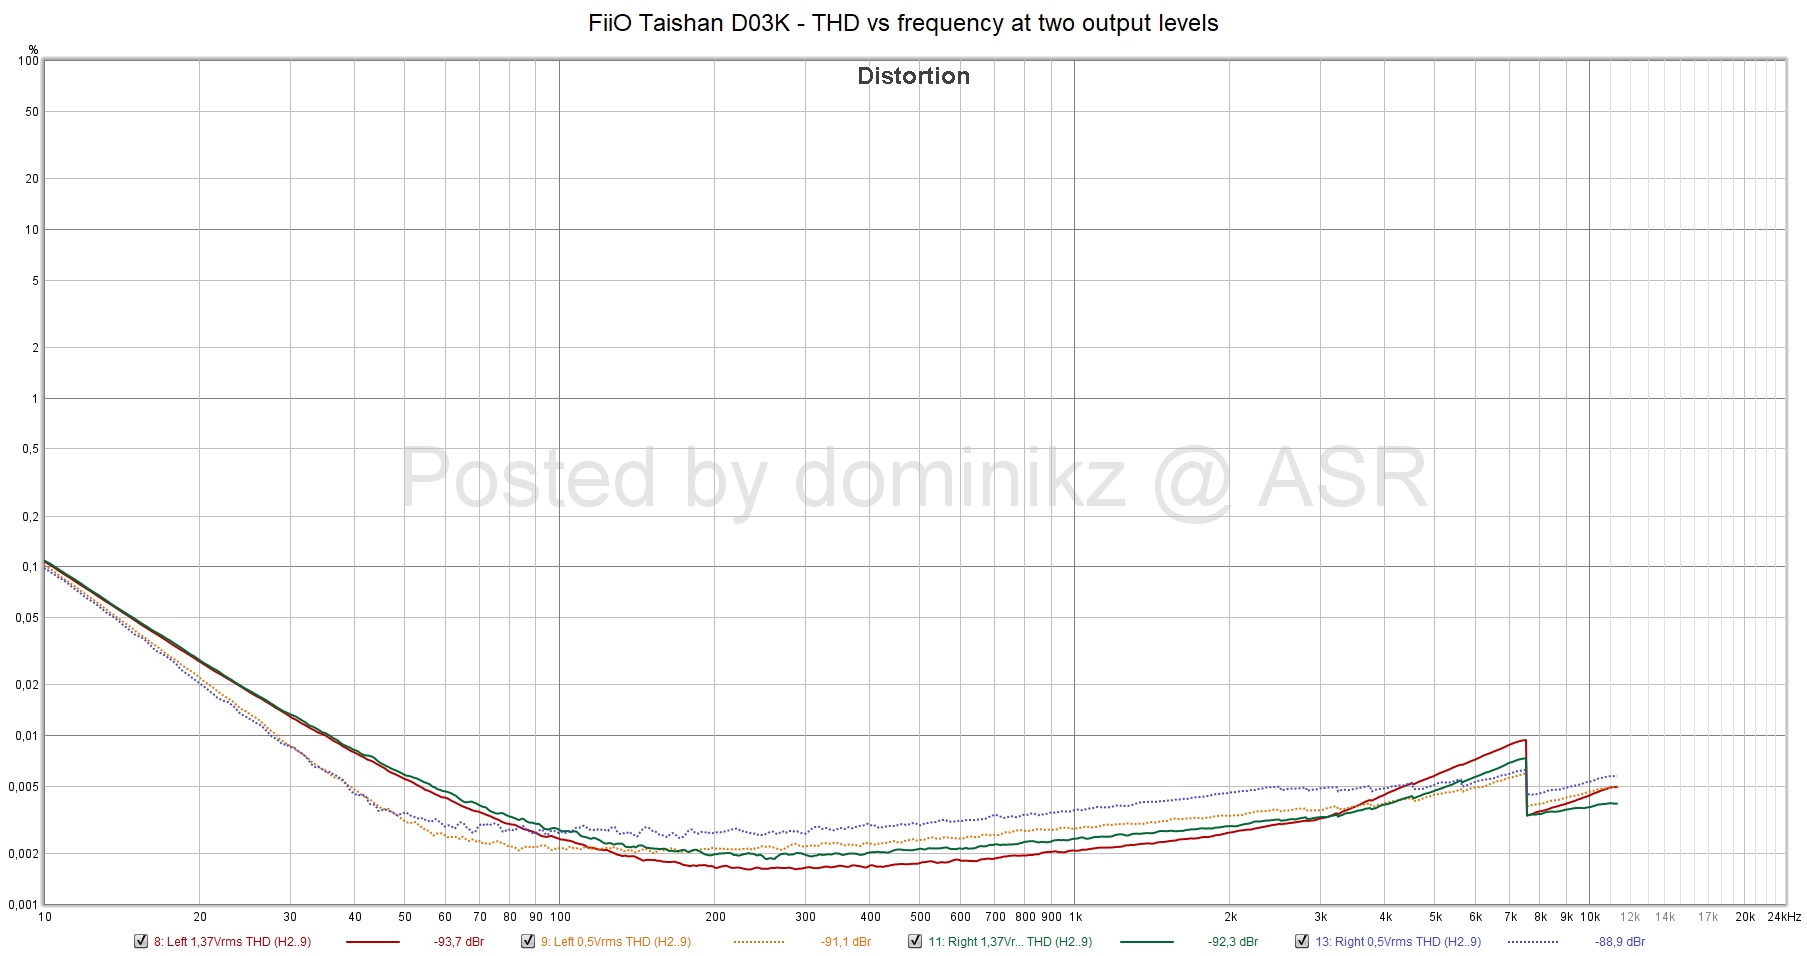 FiiO Taishan D03K - THD vs frequency at two output levels.jpg